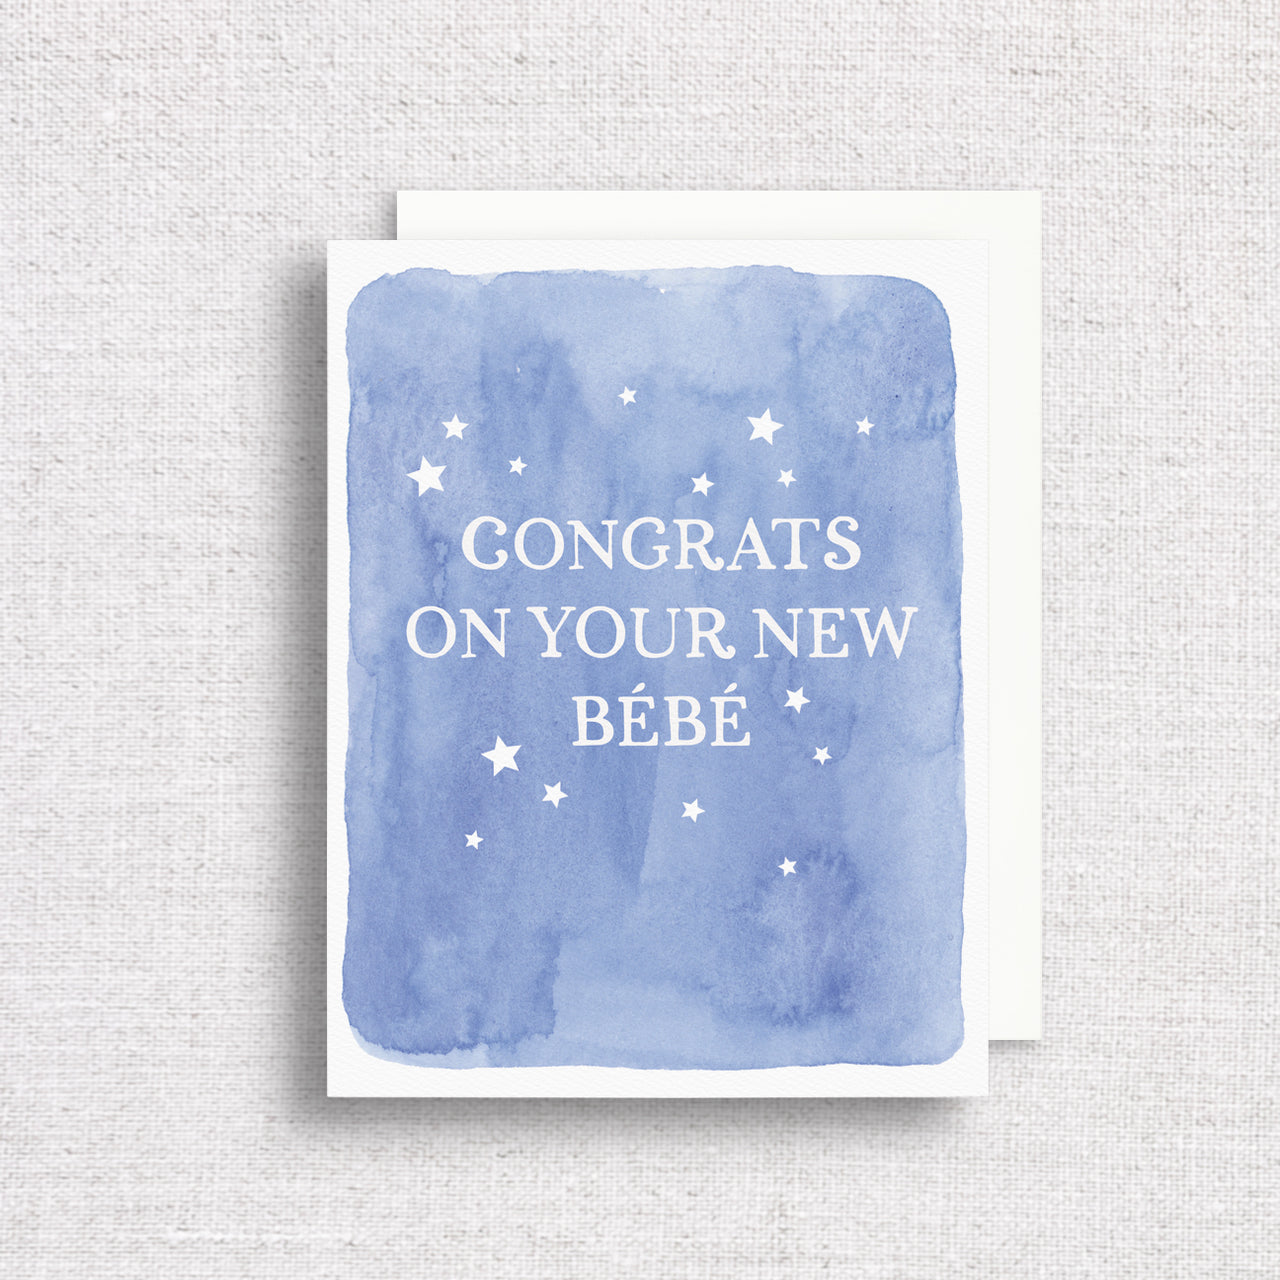 Congrats on Your New Bébé Greeting Card by Gert & Co